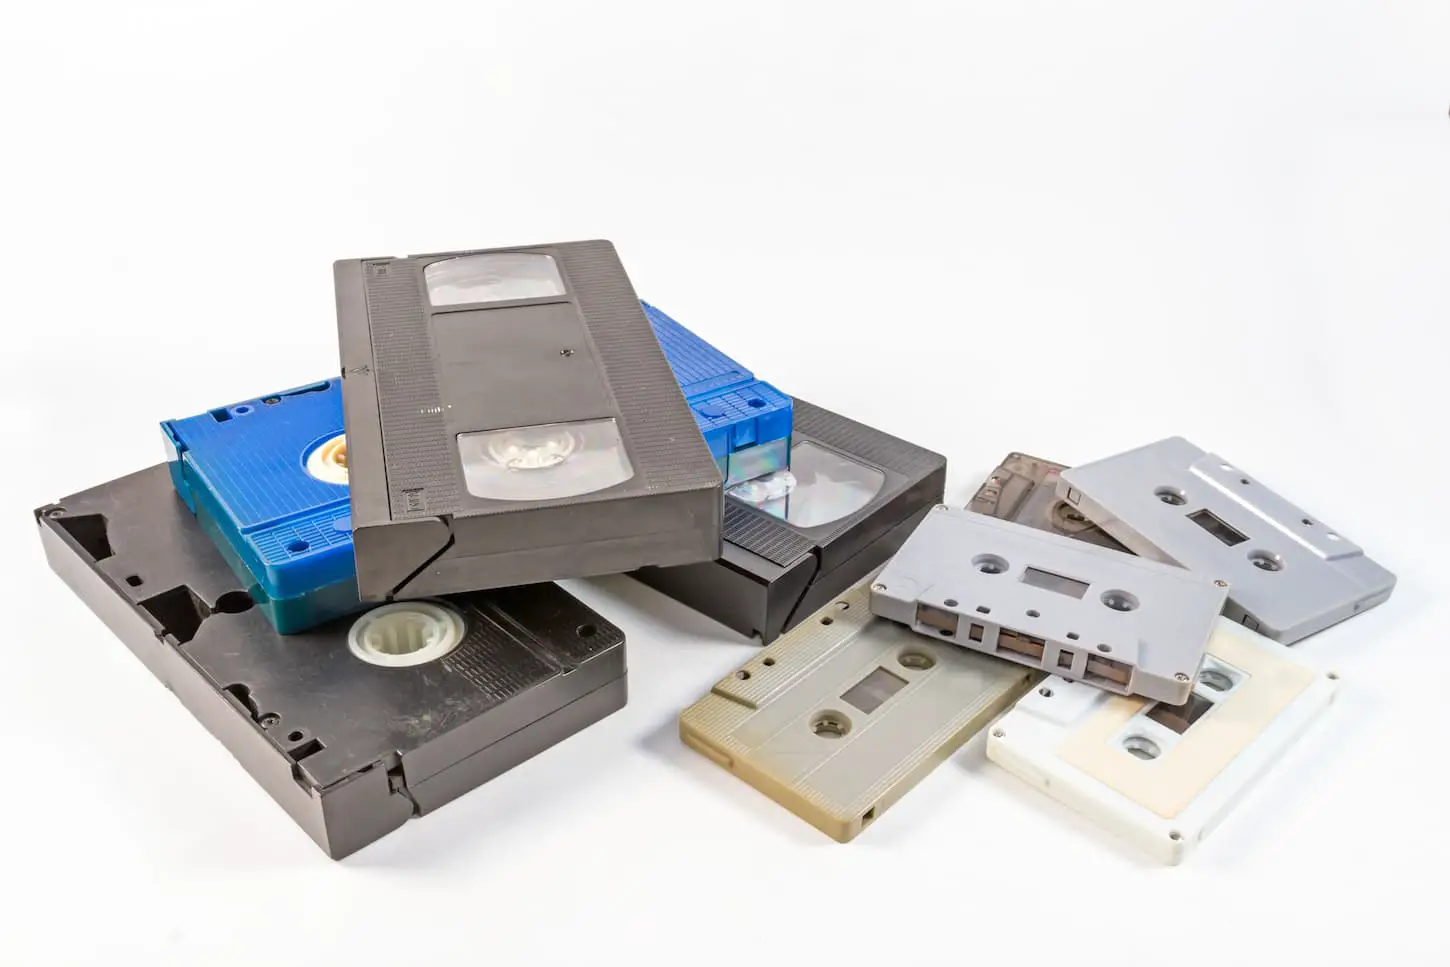 An image of old video cassettes and Audiotape cassettes on a white background.